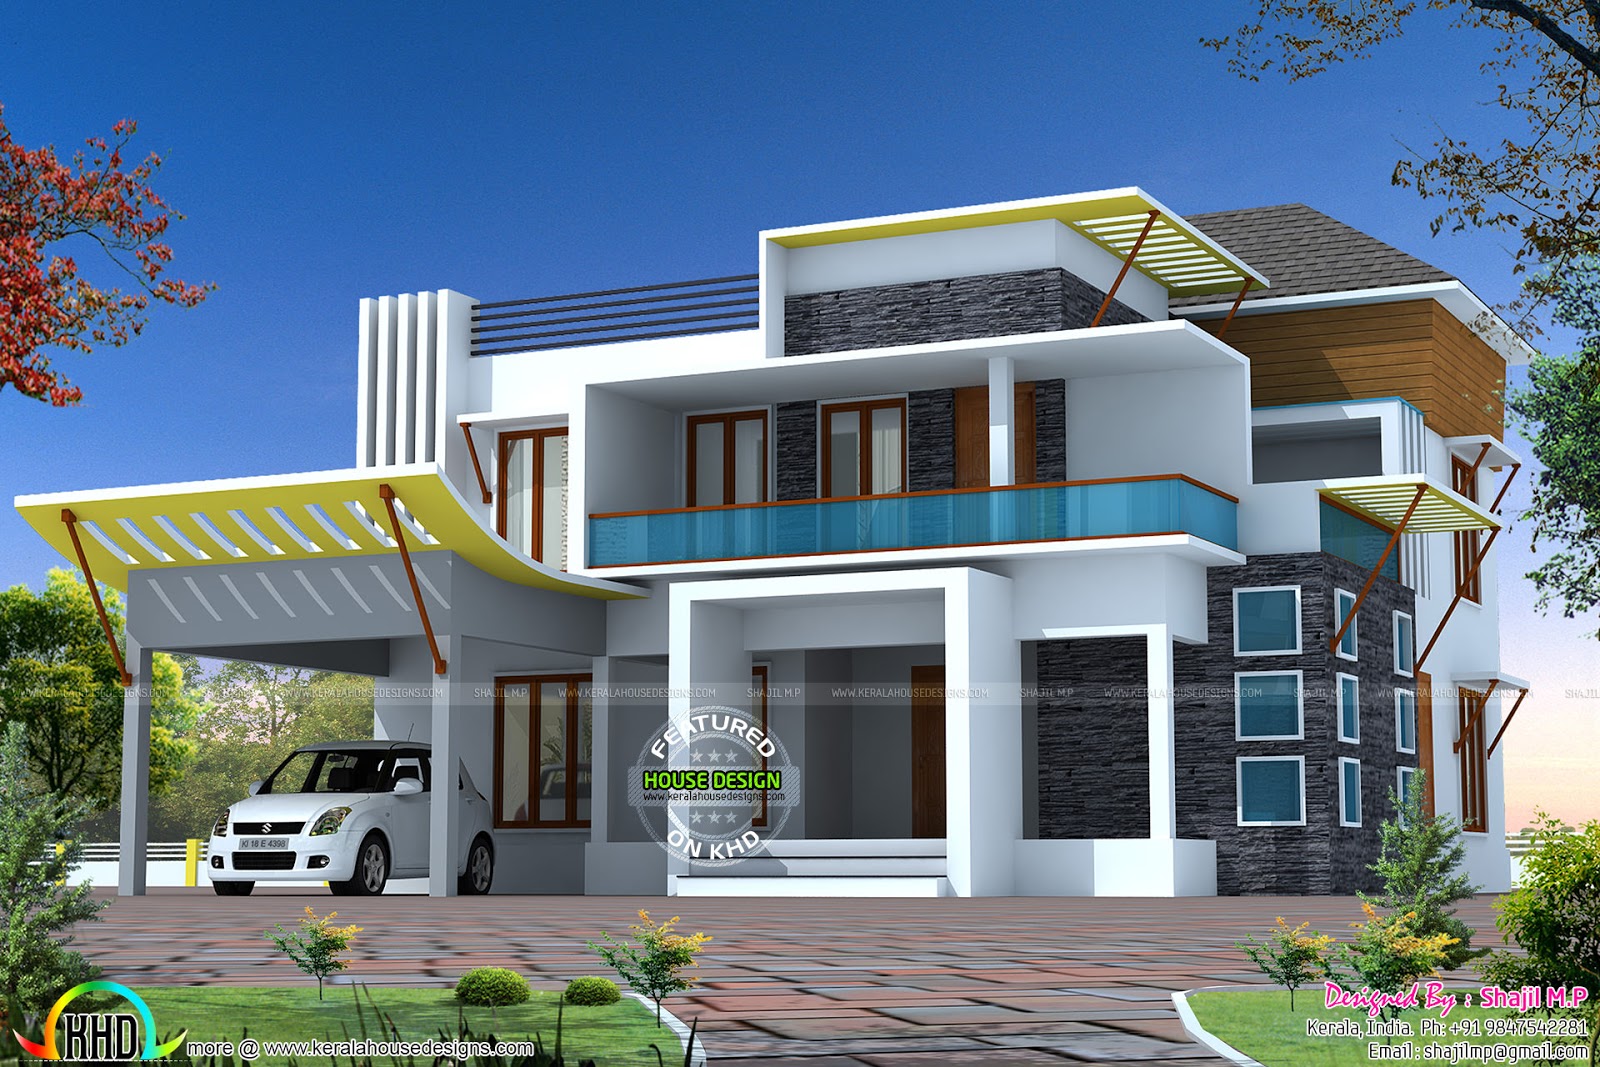 355 sq-yd modern contemporary home - Kerala home design and floor ...